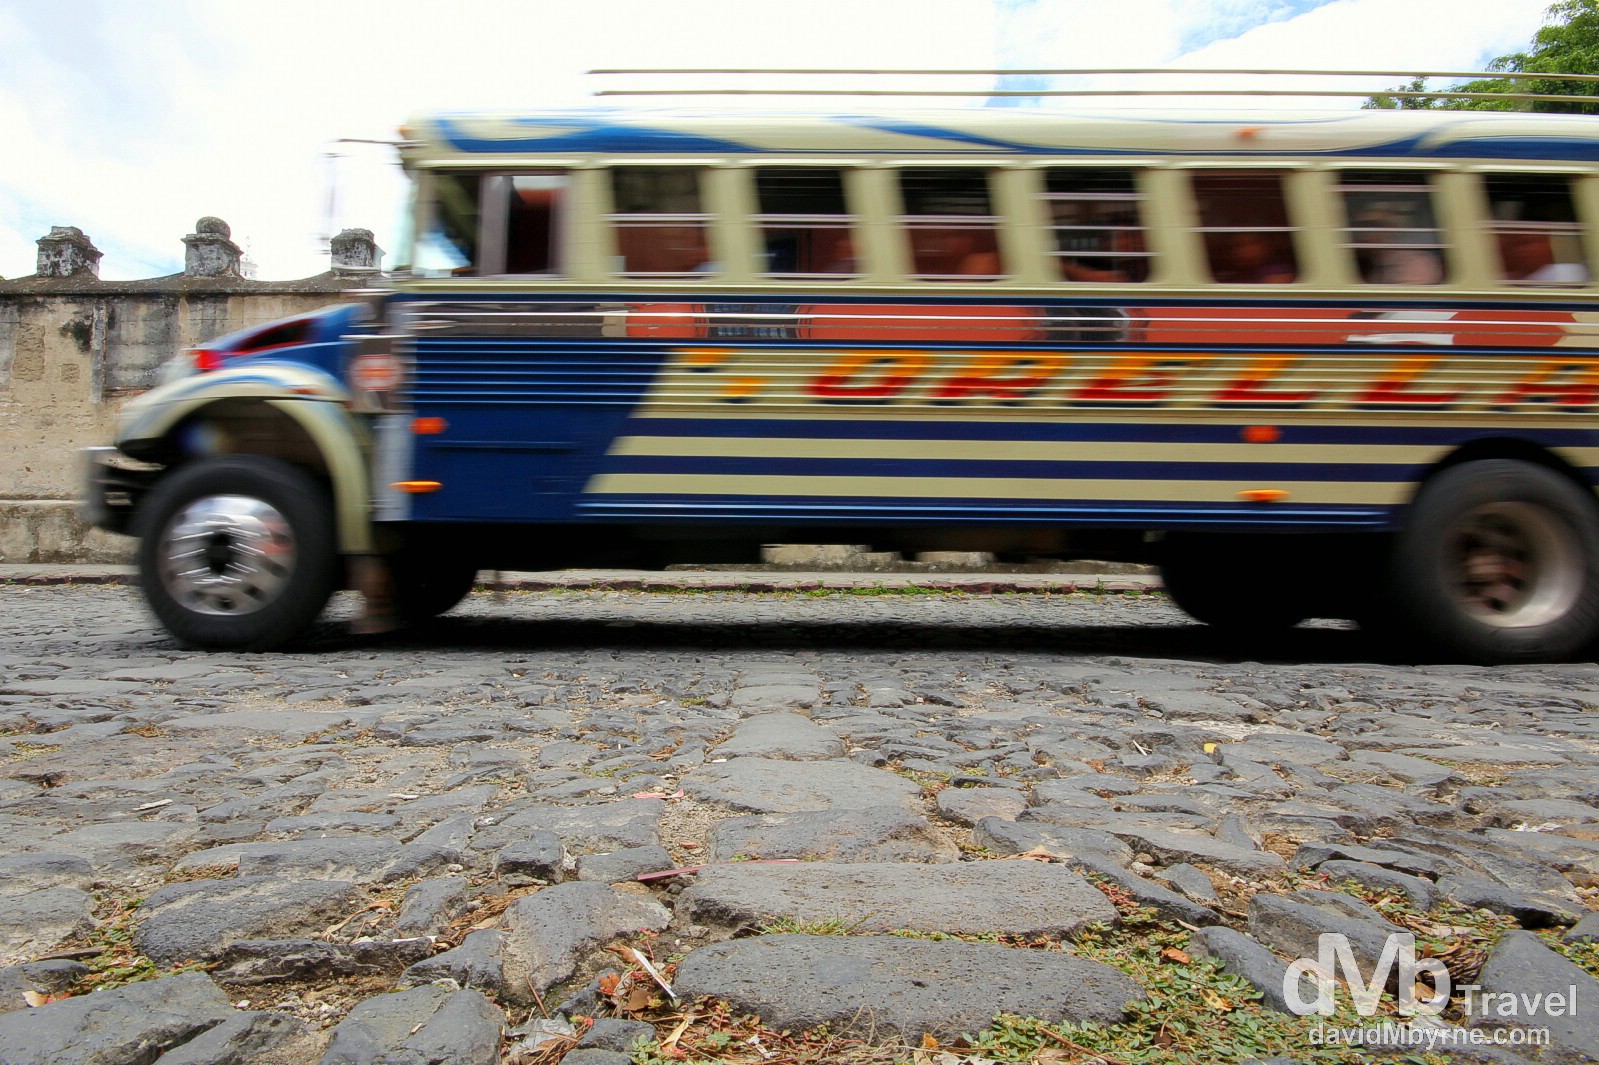 A chicken bus on the streets of Antigua, Guatemala. May 20th 2013.